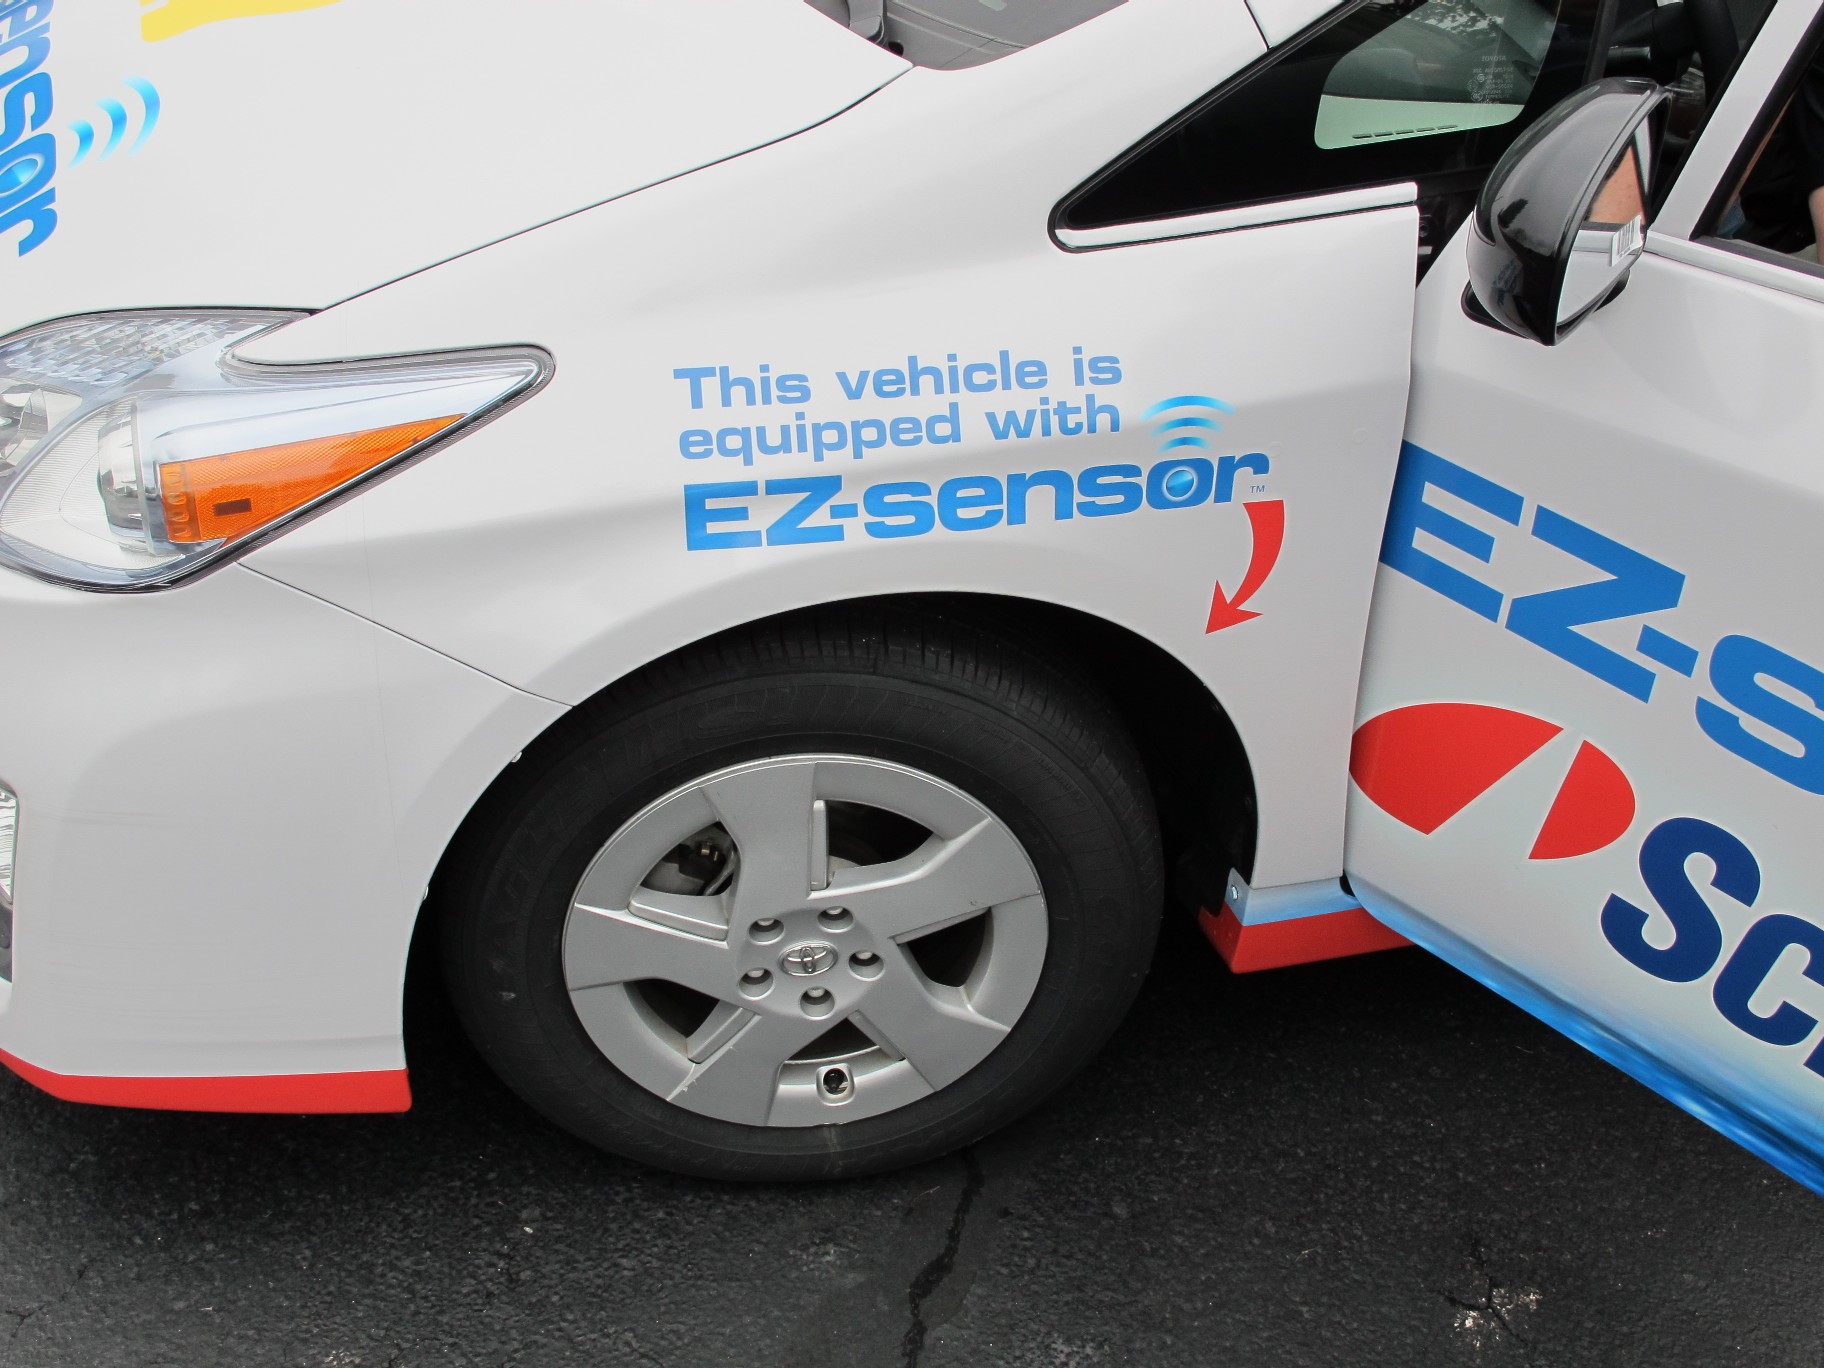 All four wheels of this Prius have been outfitted with the sensors, and the vehicle includes a station in the back where Schrader can demonstrate the functionality of the sensors and the reprogramming tool. 